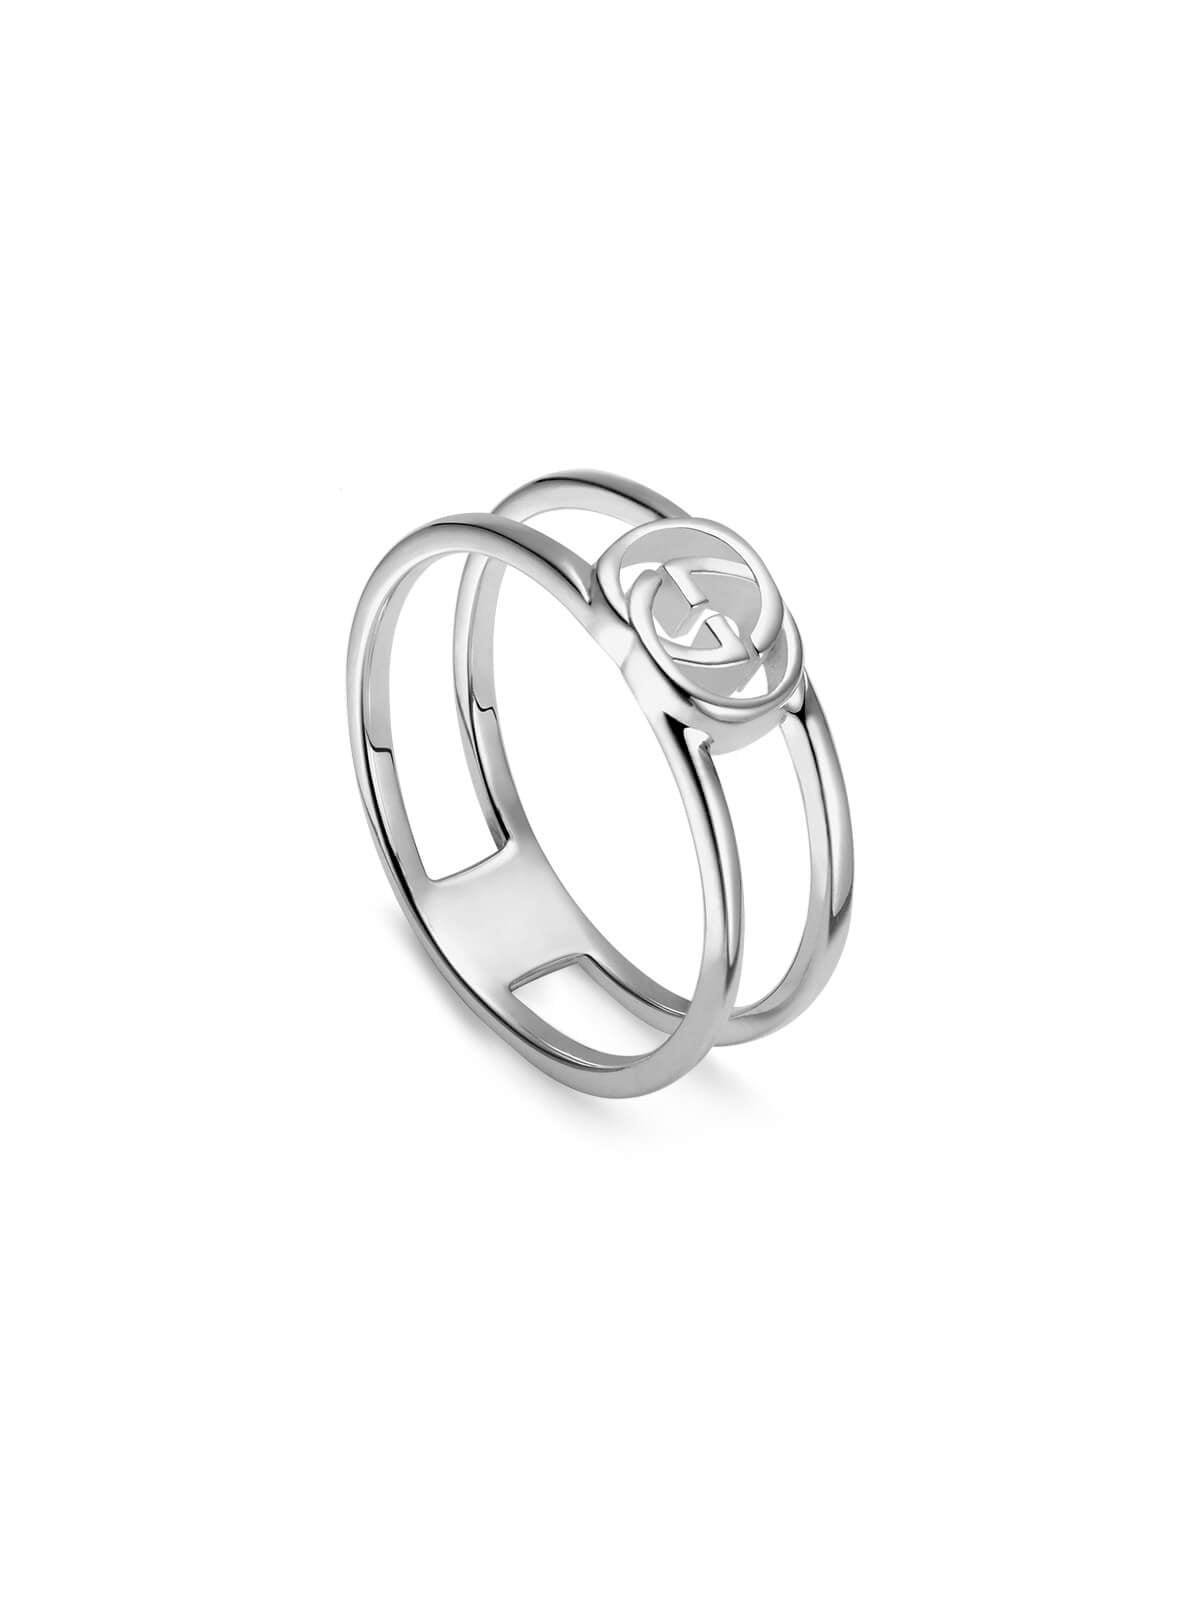 Gucci Interlocking G Ring 6mm in Silver - Size 13